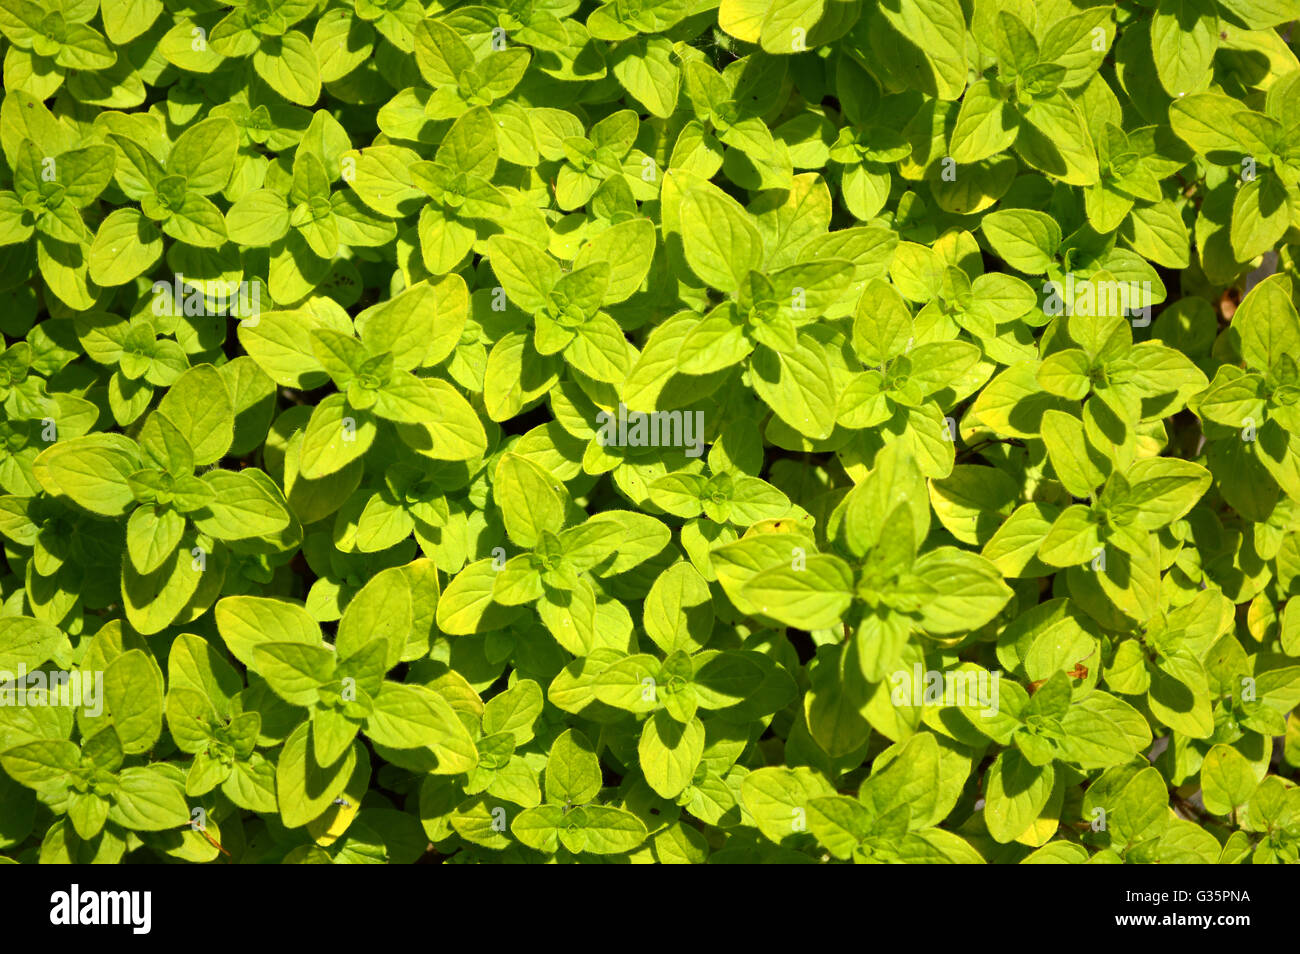 A carpet of green leaves in garden plant pot Stock Photo